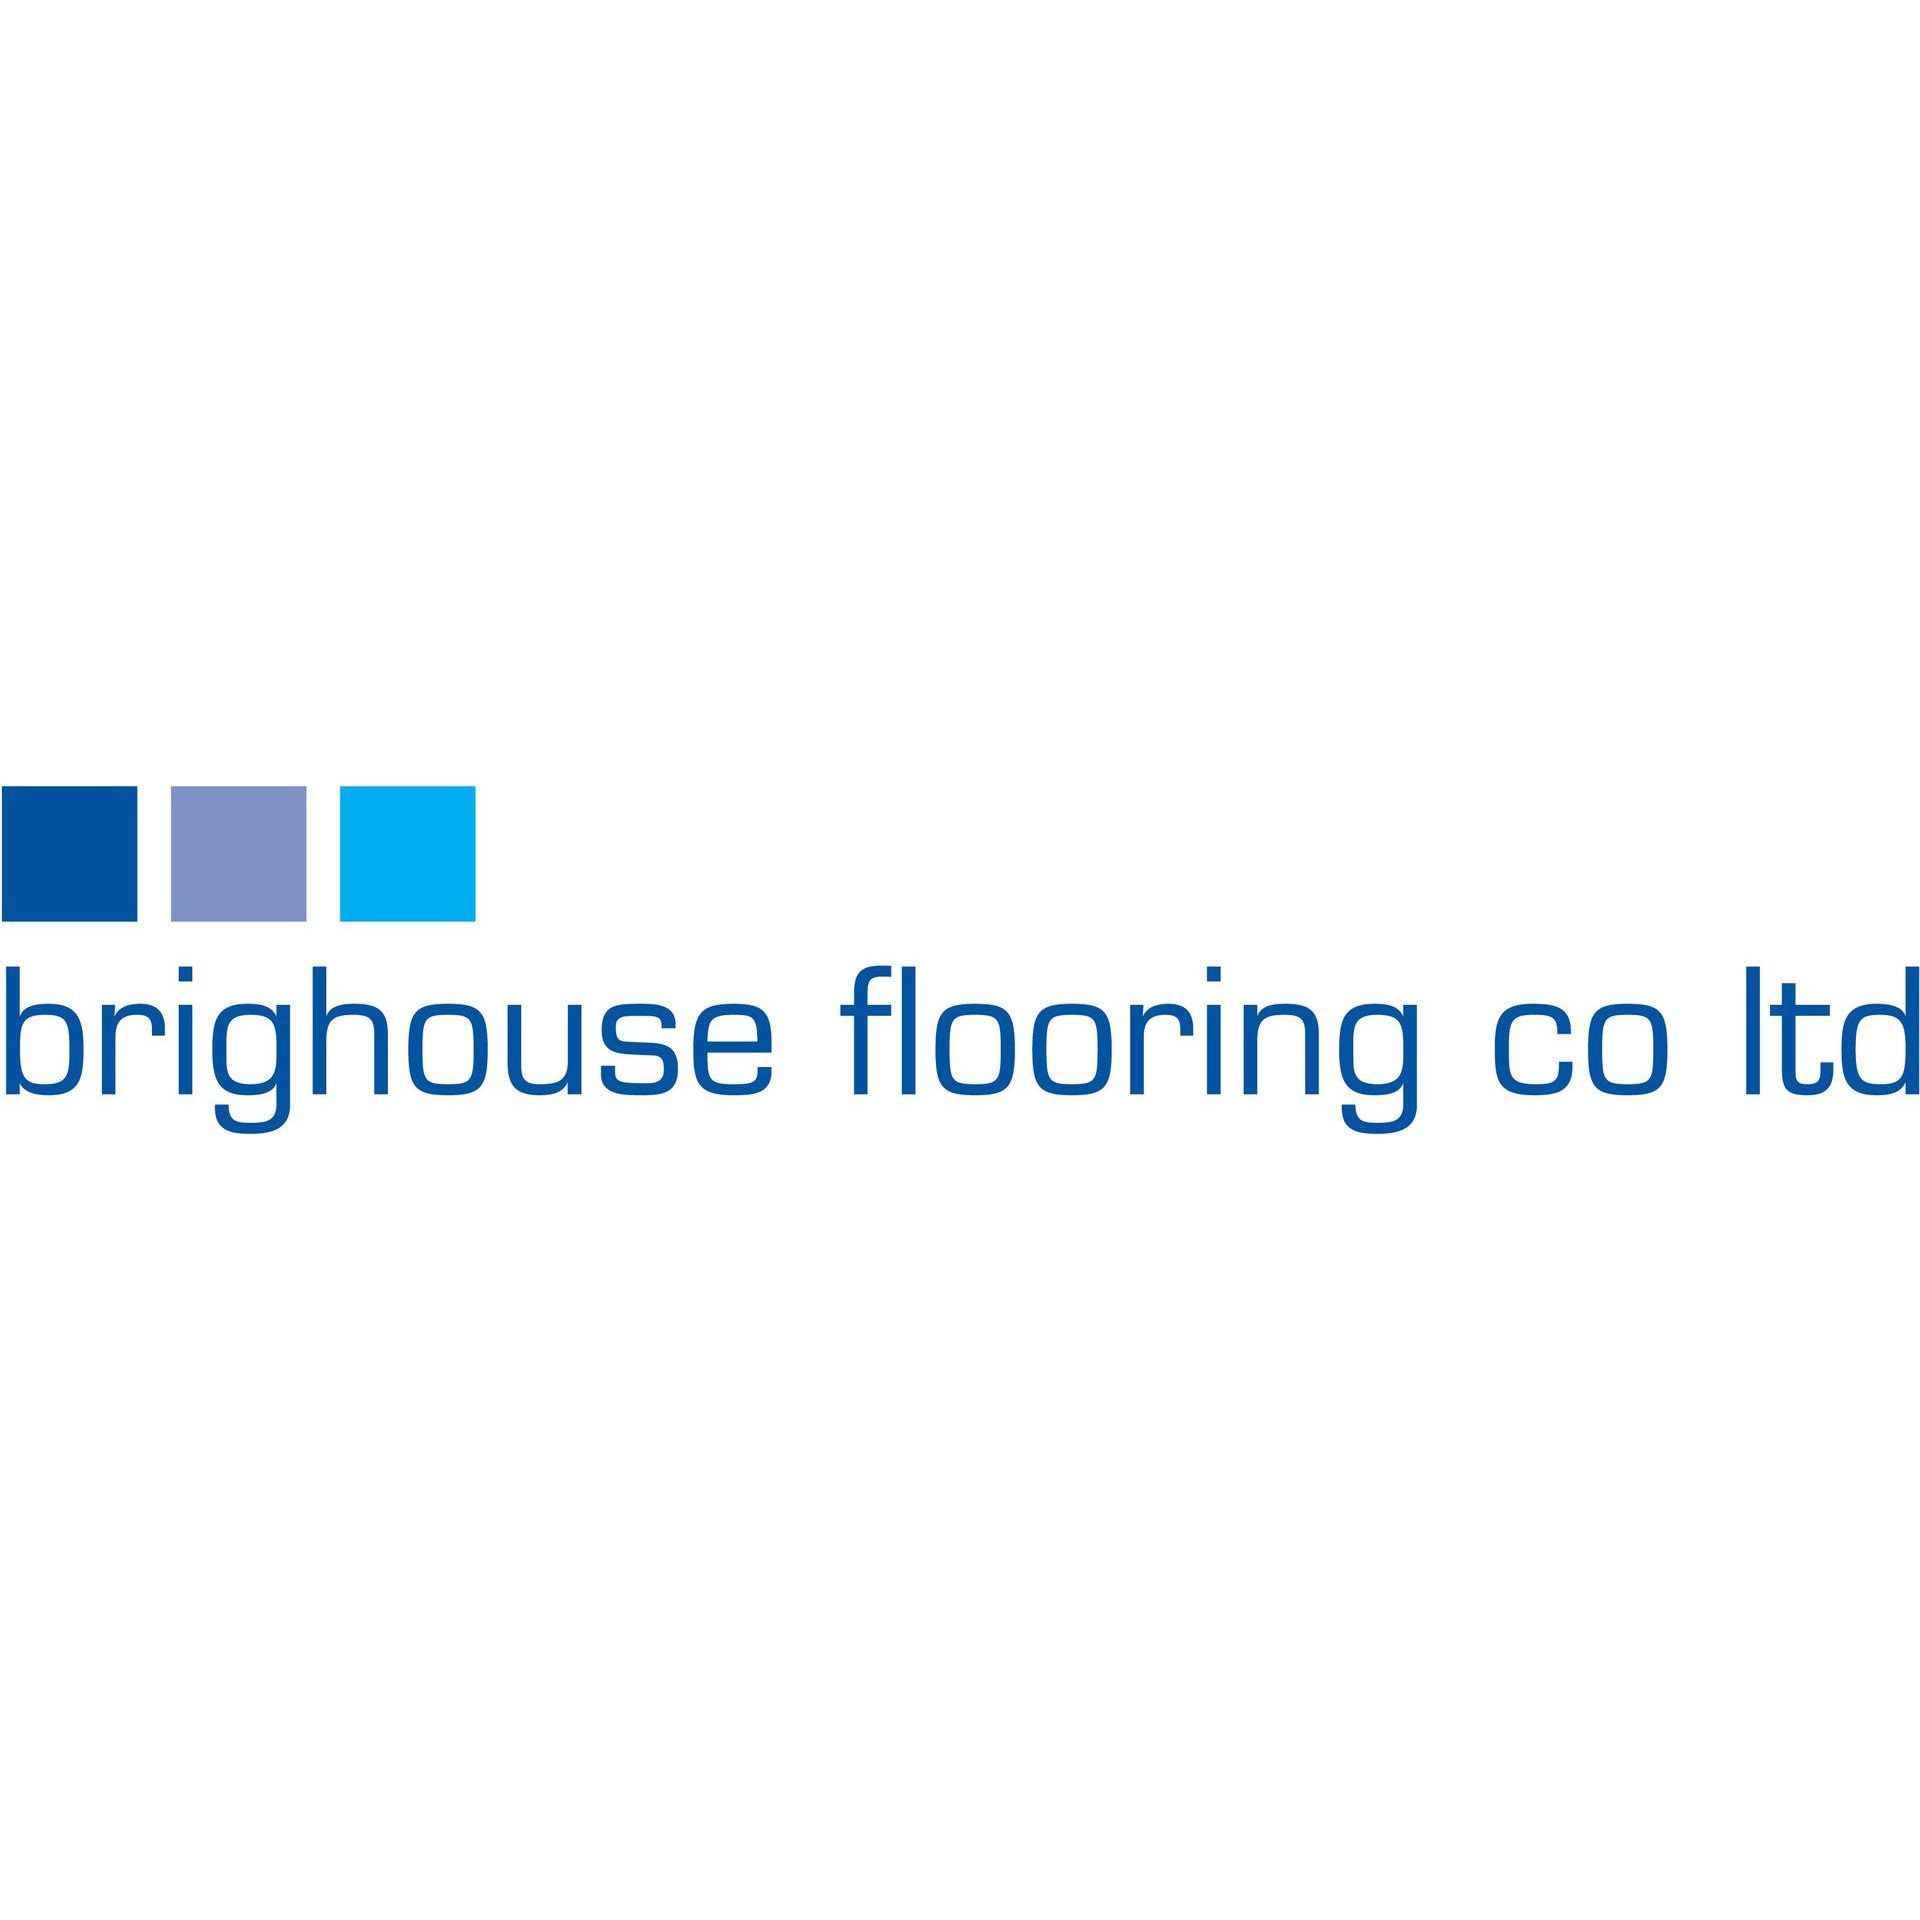 Brighouse Flooring Co.Ltd - Brighouse, West Yorkshire HD6 4AH - 01484 401199 | ShowMeLocal.com